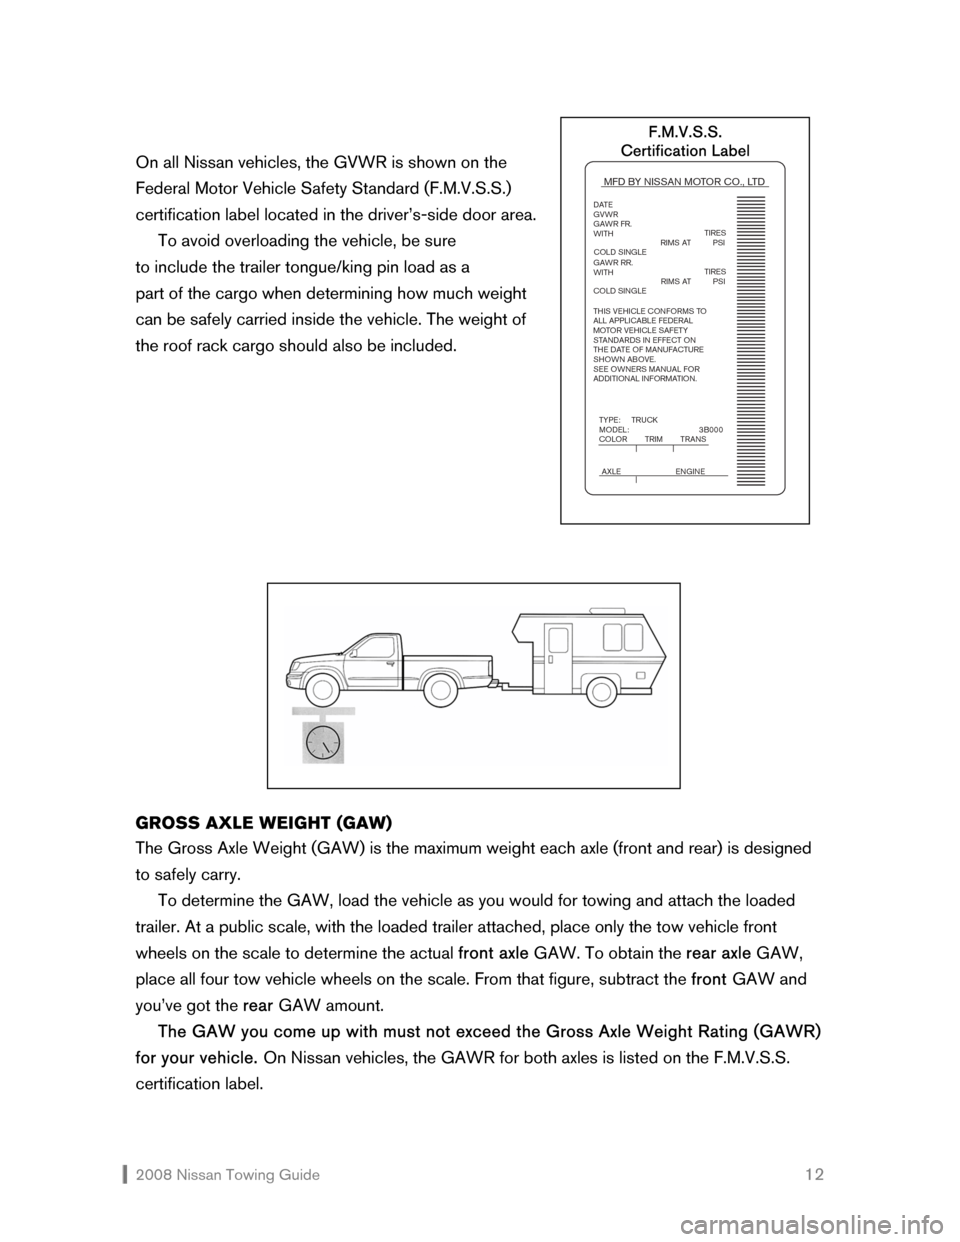 NISSAN 350Z 2008 Z33 Towing Guide  2008 Nissan Towing Guide    12 On all Nissan vehicles, the GVWR is shown on the  
Federal Motor Vehicle Safety Standard (F.M.V.S.S.) 
certification label located in the driver’s-side door area.  
 